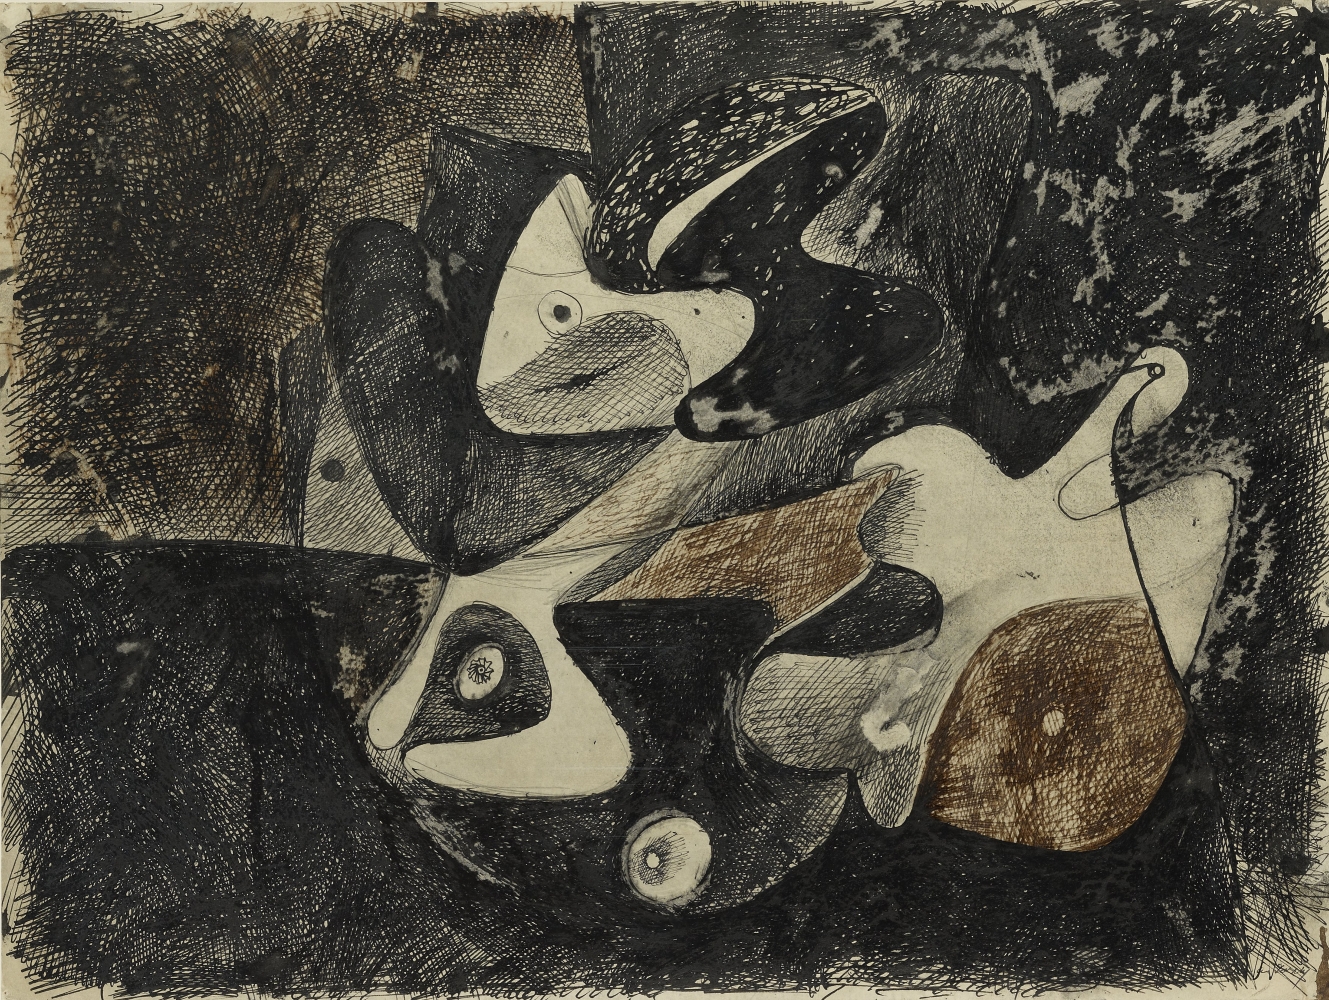 Nighttime, Enigma, and Nostalgia, c. 1934&ndash;36, ink, ink wash, and graphite pencil on paper 17 1/2 x 23 in. (44.4 x 58.4 cm). Private collection. [AGCR: D0462]